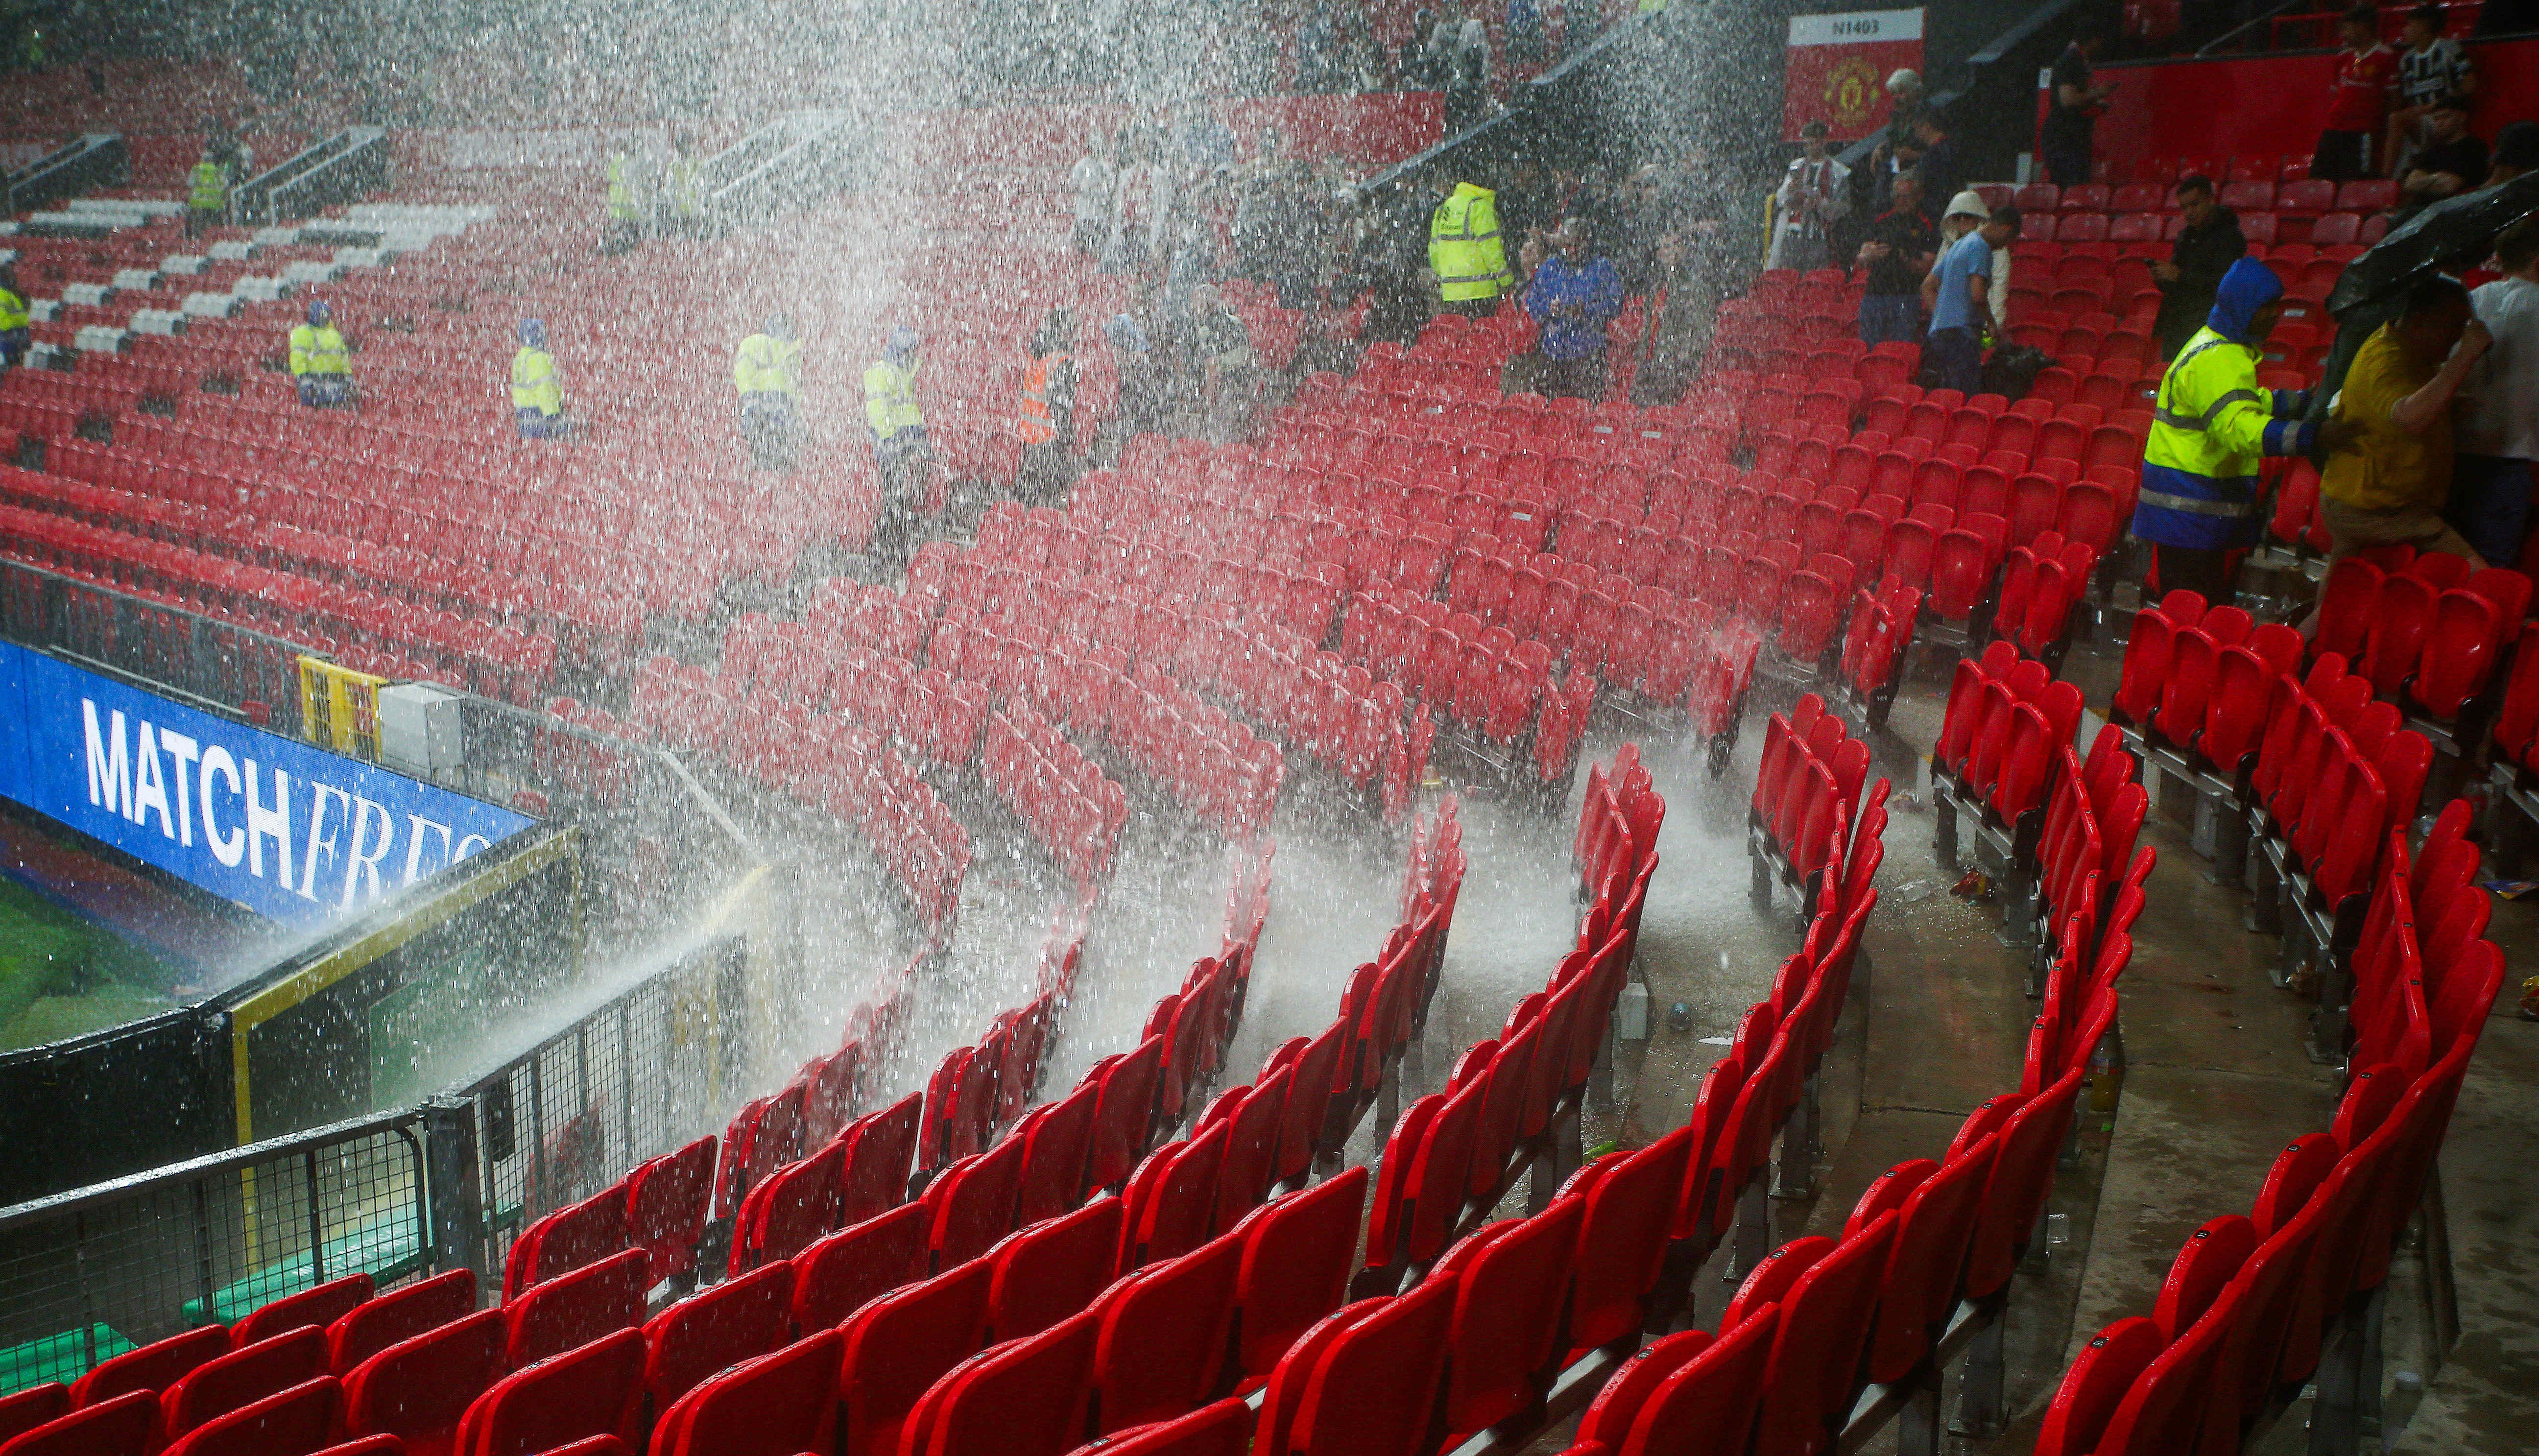 Seats next to the pitch were flooded by the rain coming in